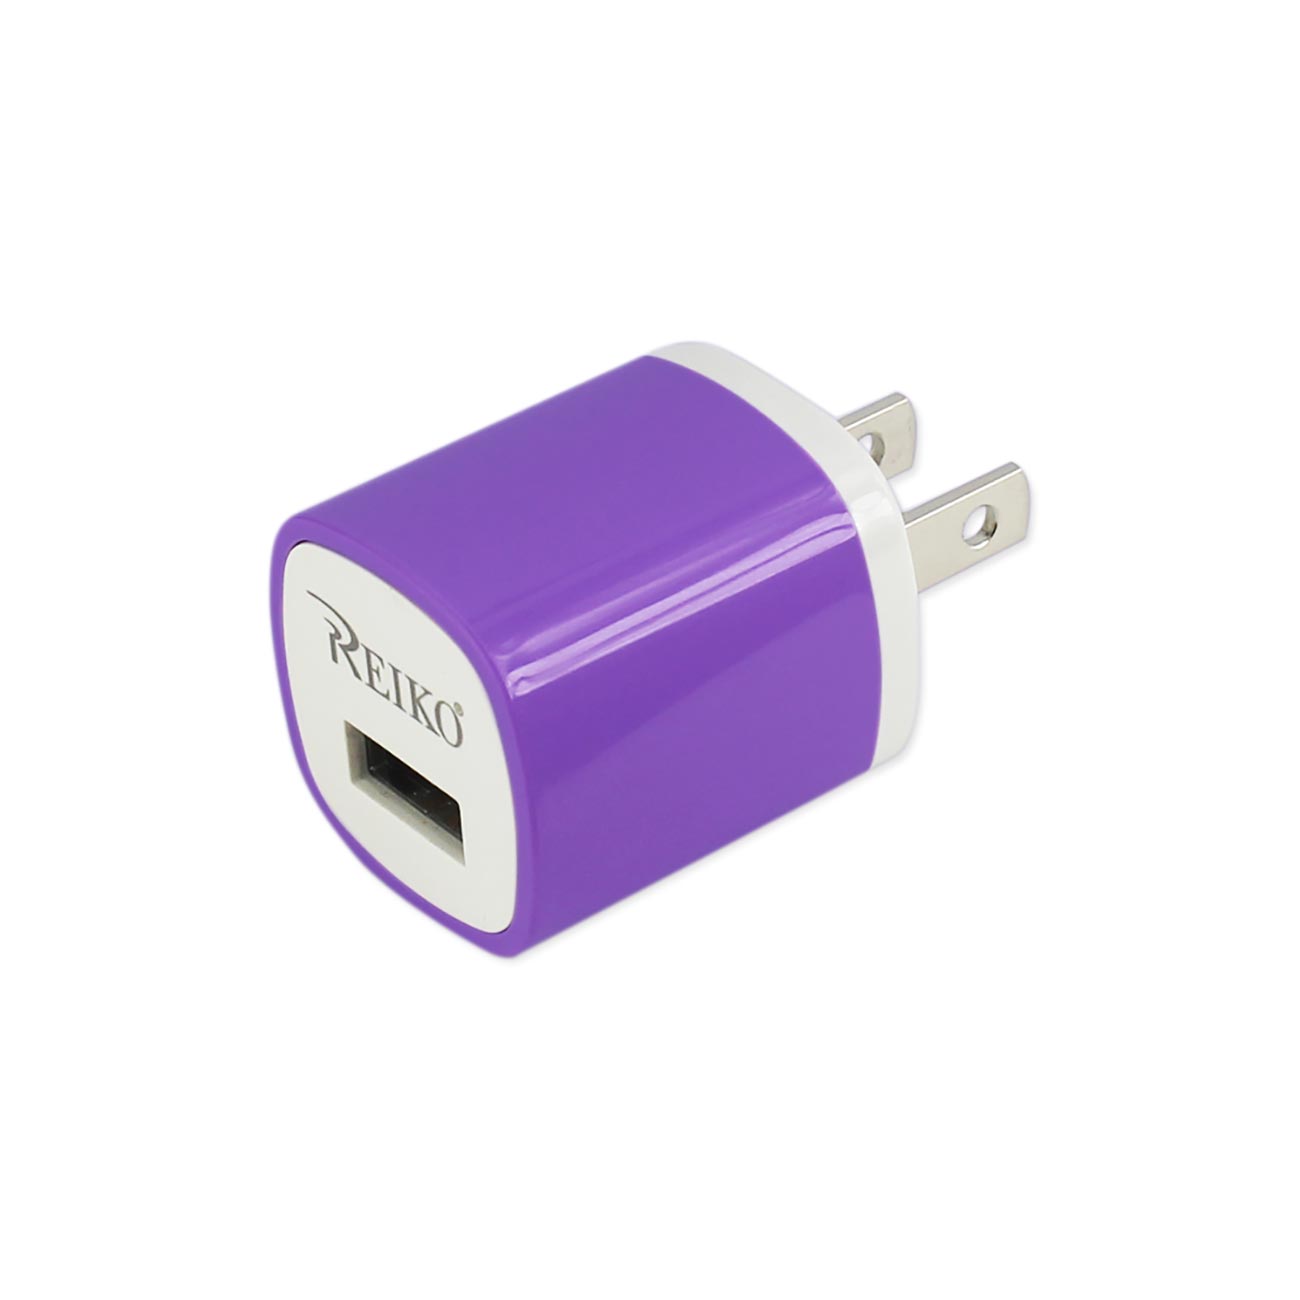 Charger Adapter USB 1 Amp Purple Color-